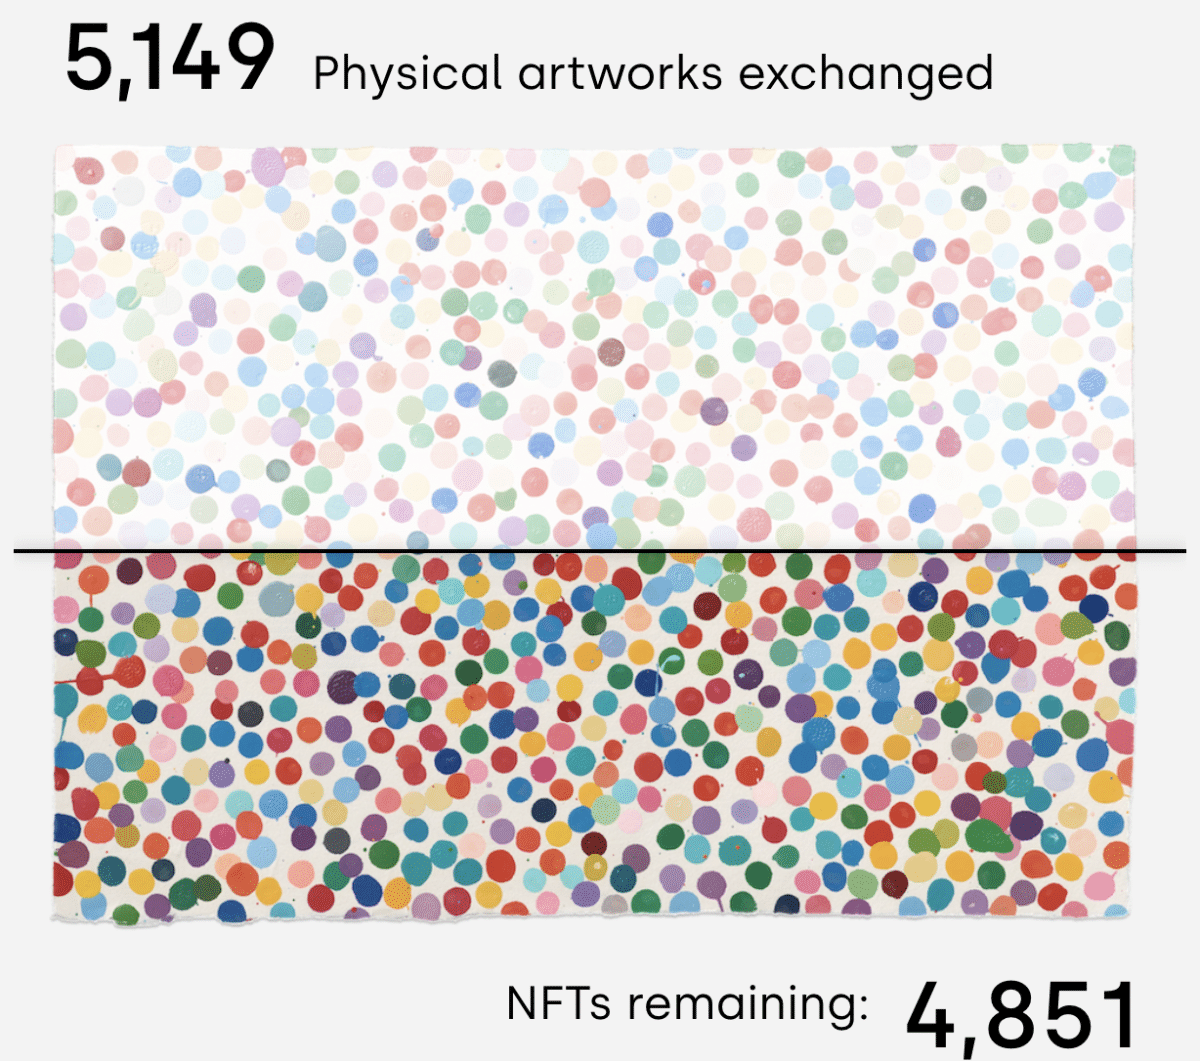 image of the website showing stats from the Damien Hirst NFT experiment